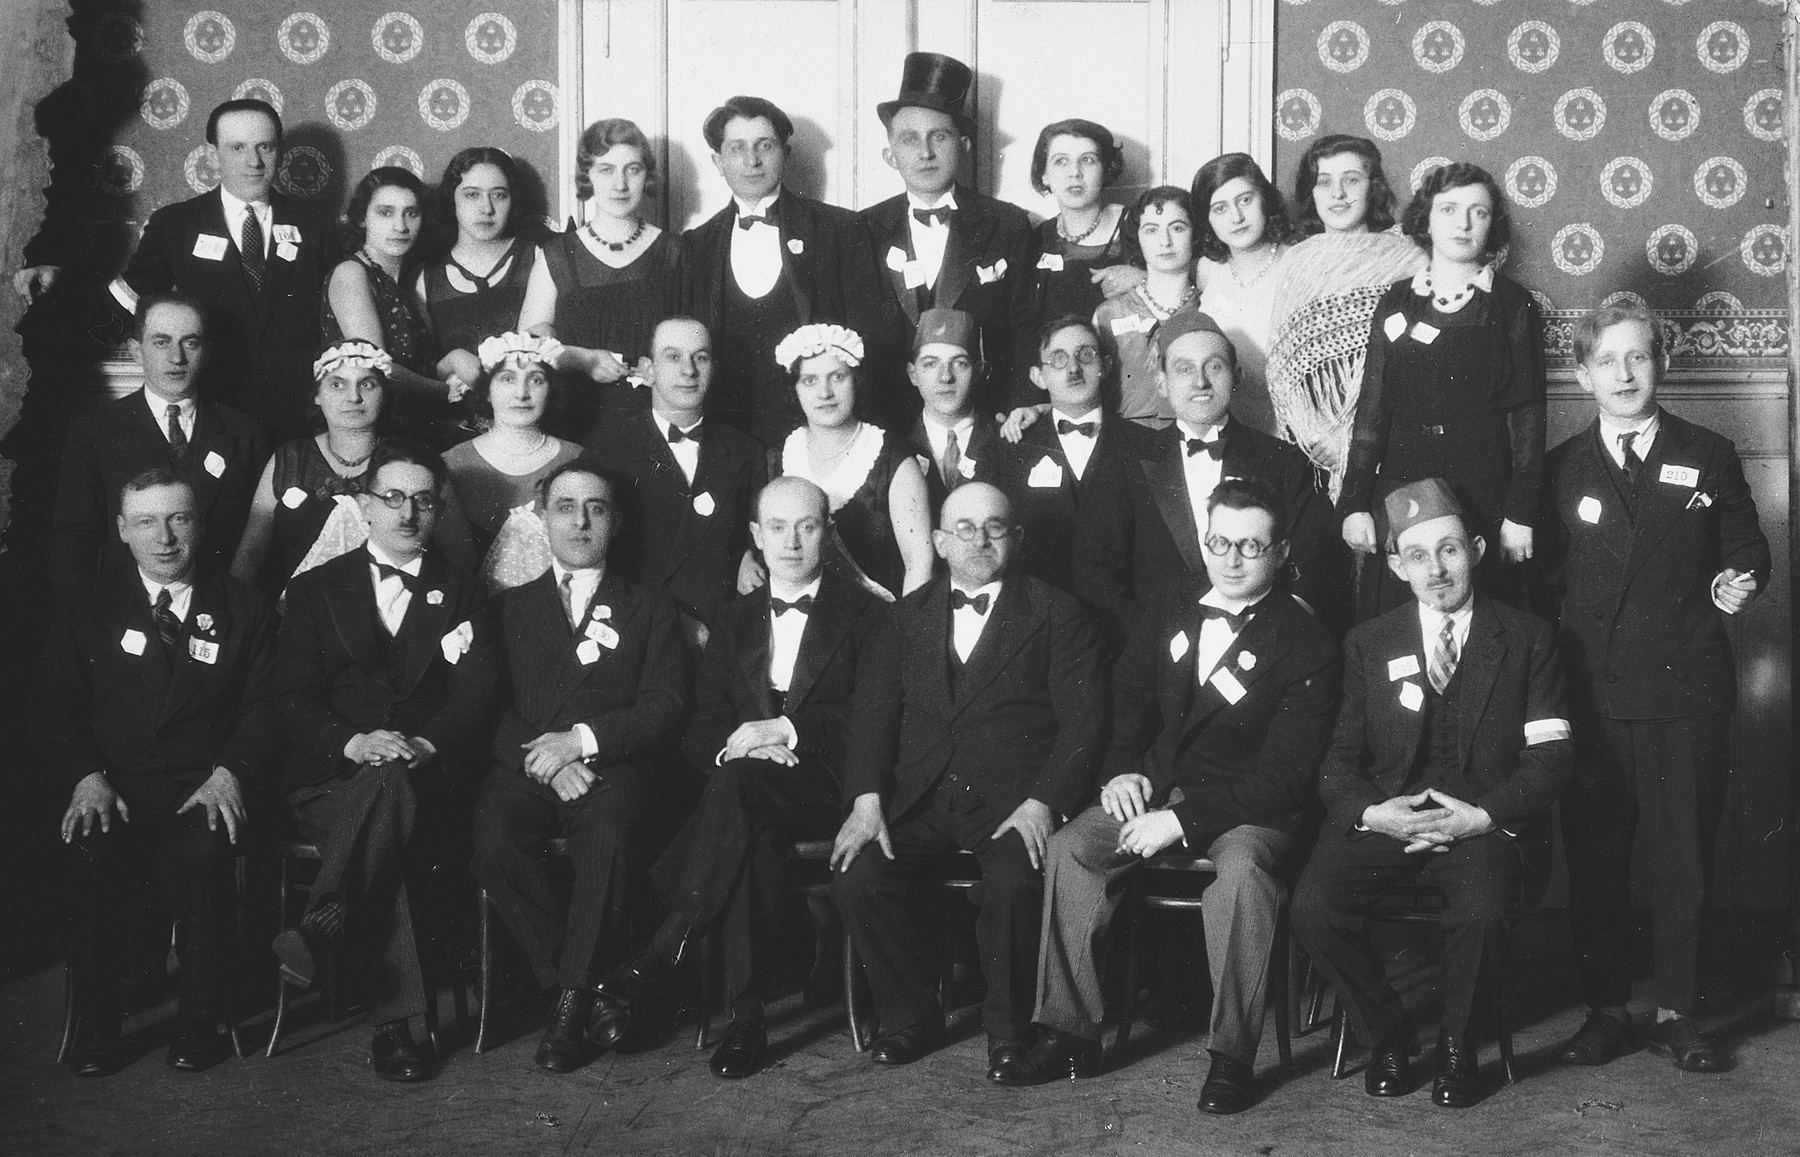 Group portrait of French Jews celebrating Purim in formal attire and costumes in Strasbourg.

Among those pictured is Sabina Findling (top row, third from left).